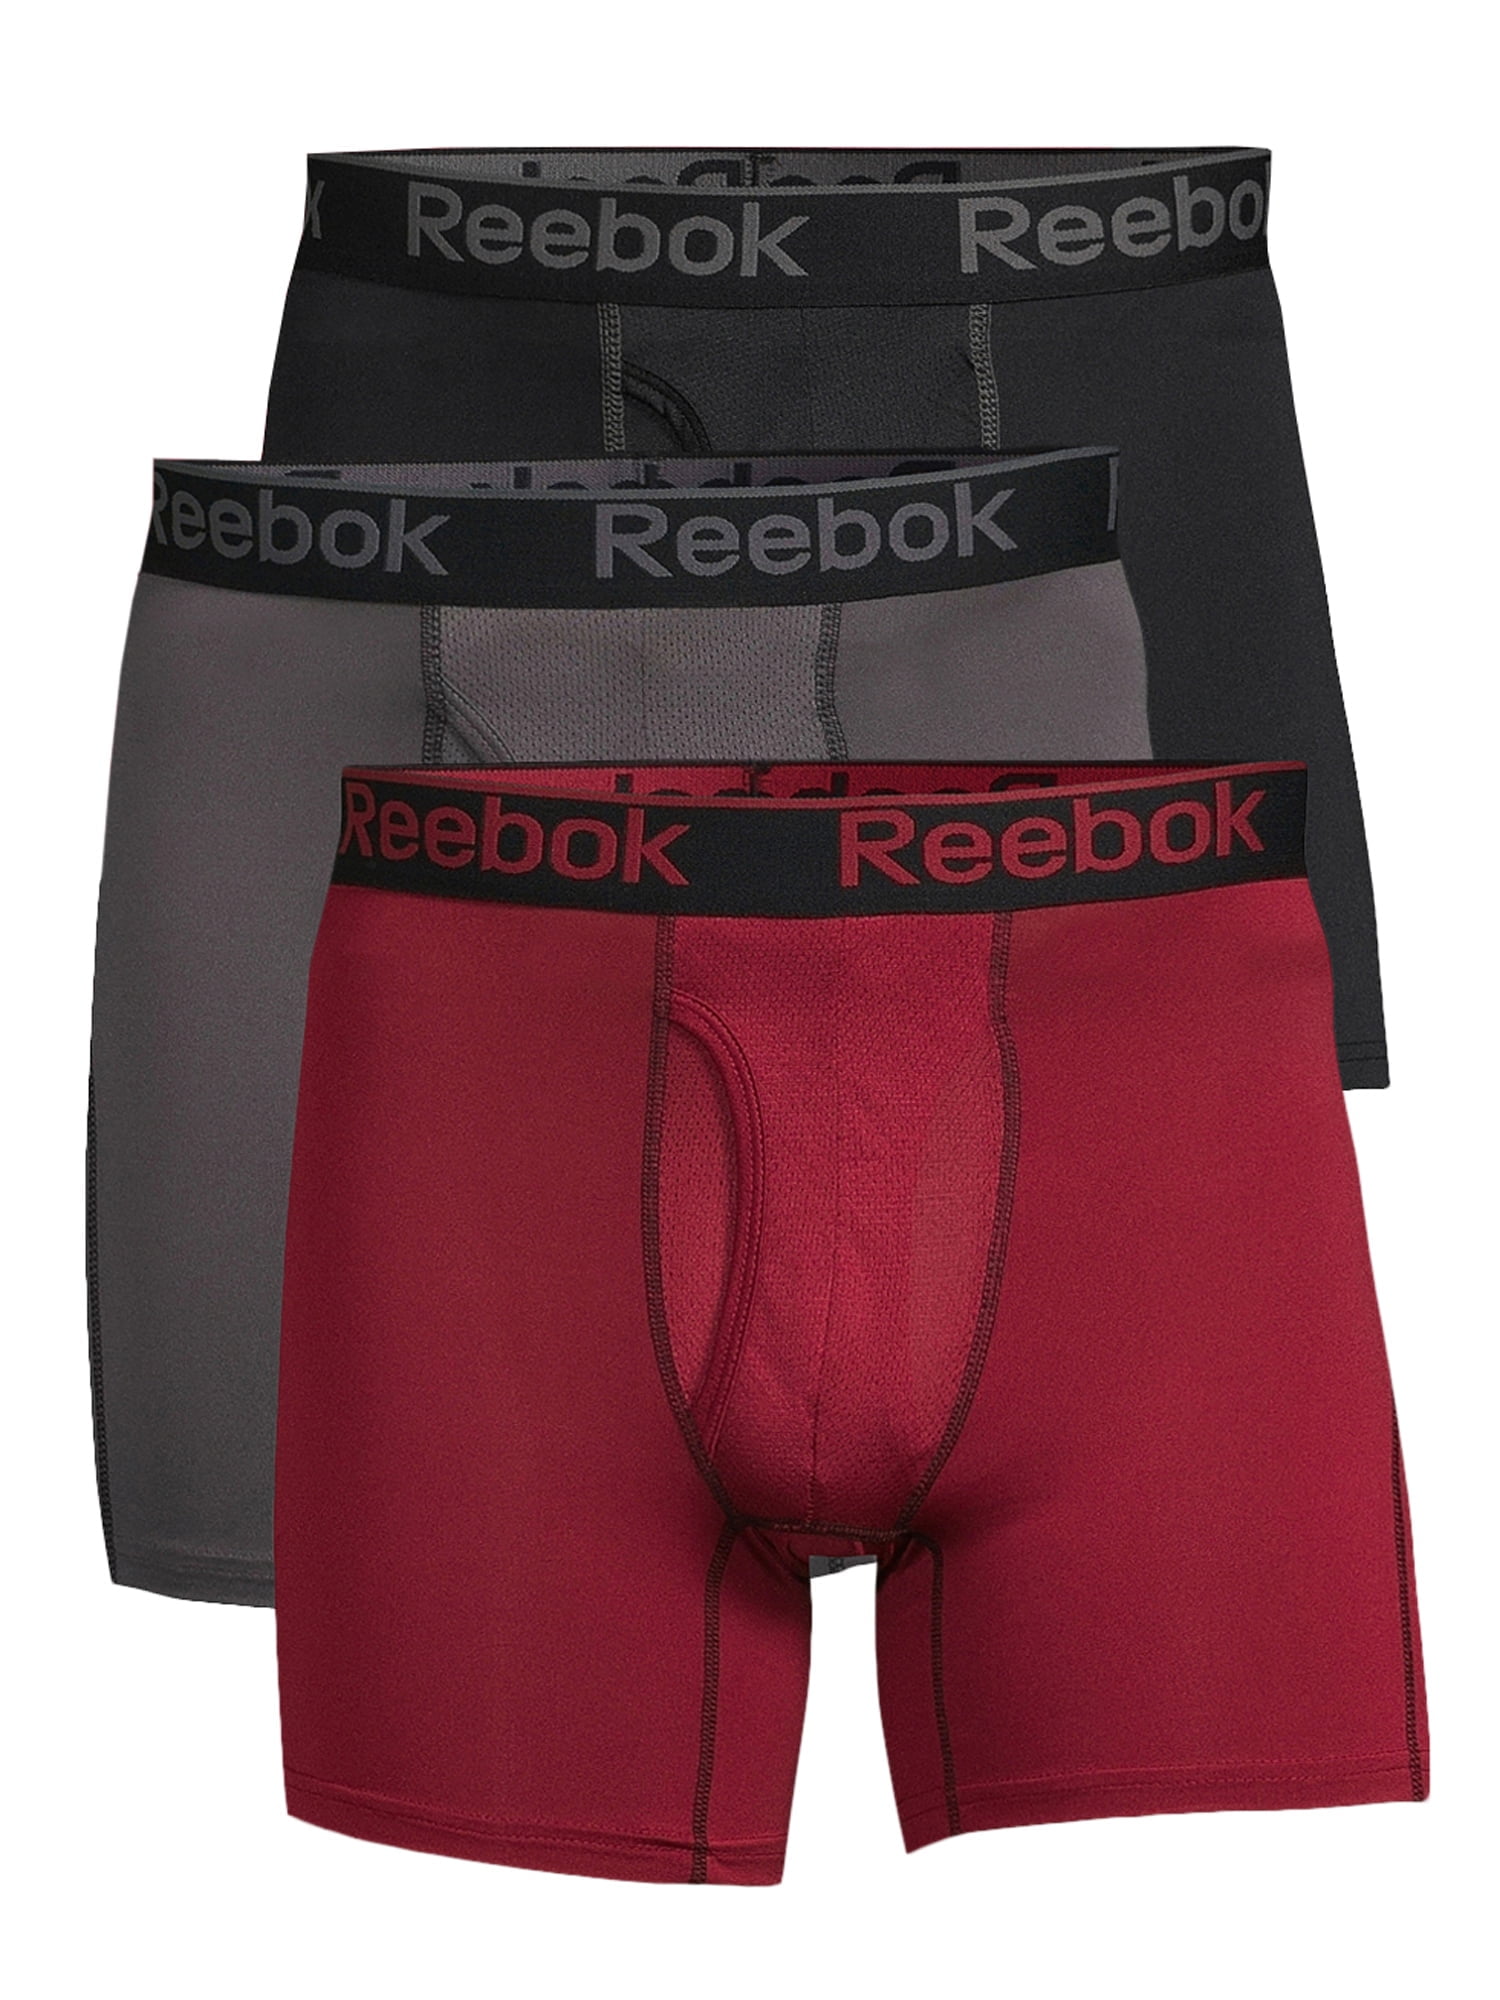 Reebok Mens Big and Tall Cooling Athletic Performance Boxer Briefs 3 Pack 